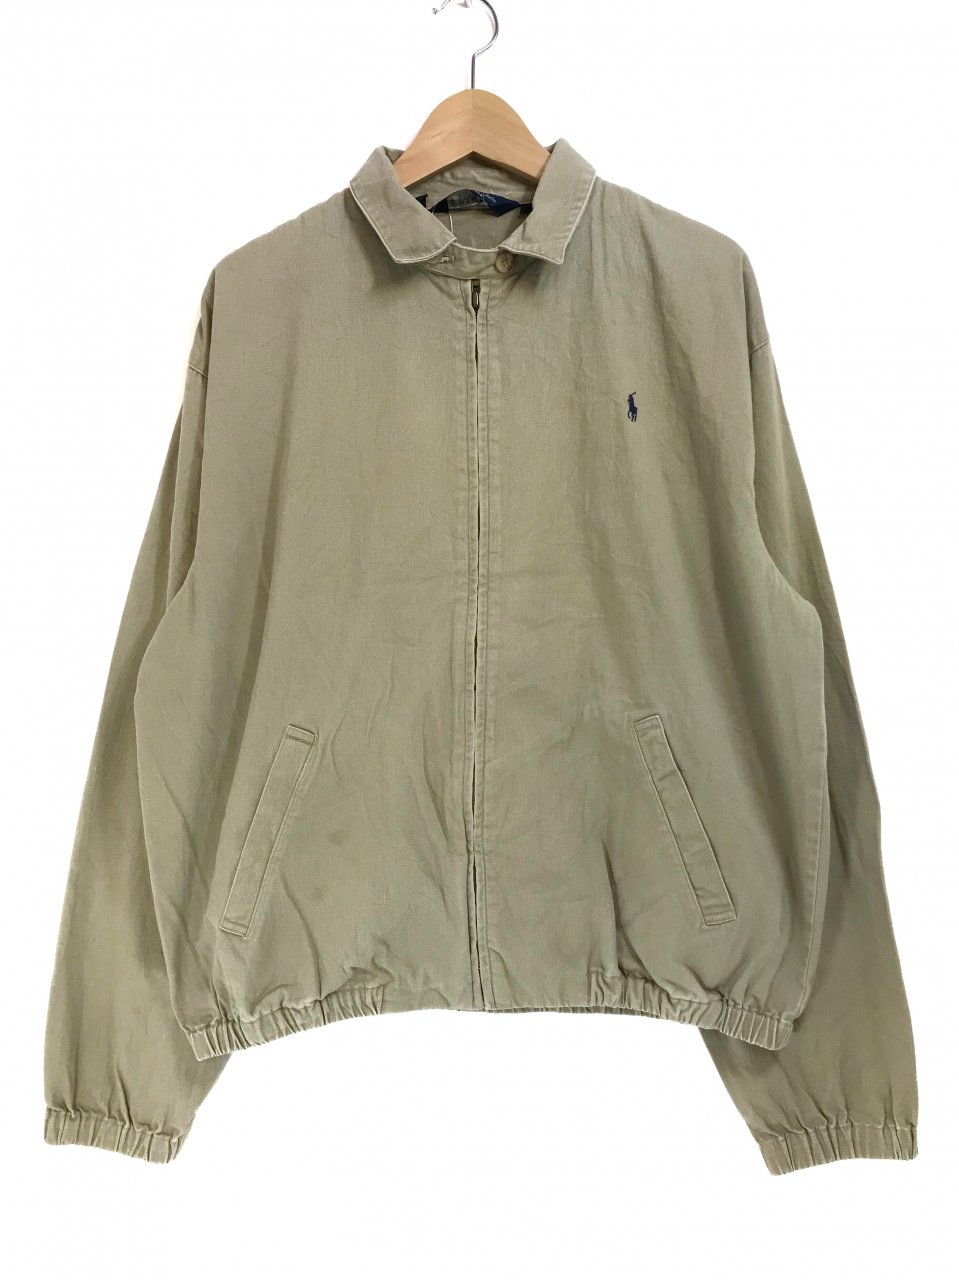 USA製 s～s Polo Ralph Lauren Cotton Drizzler Jacket カーキ M